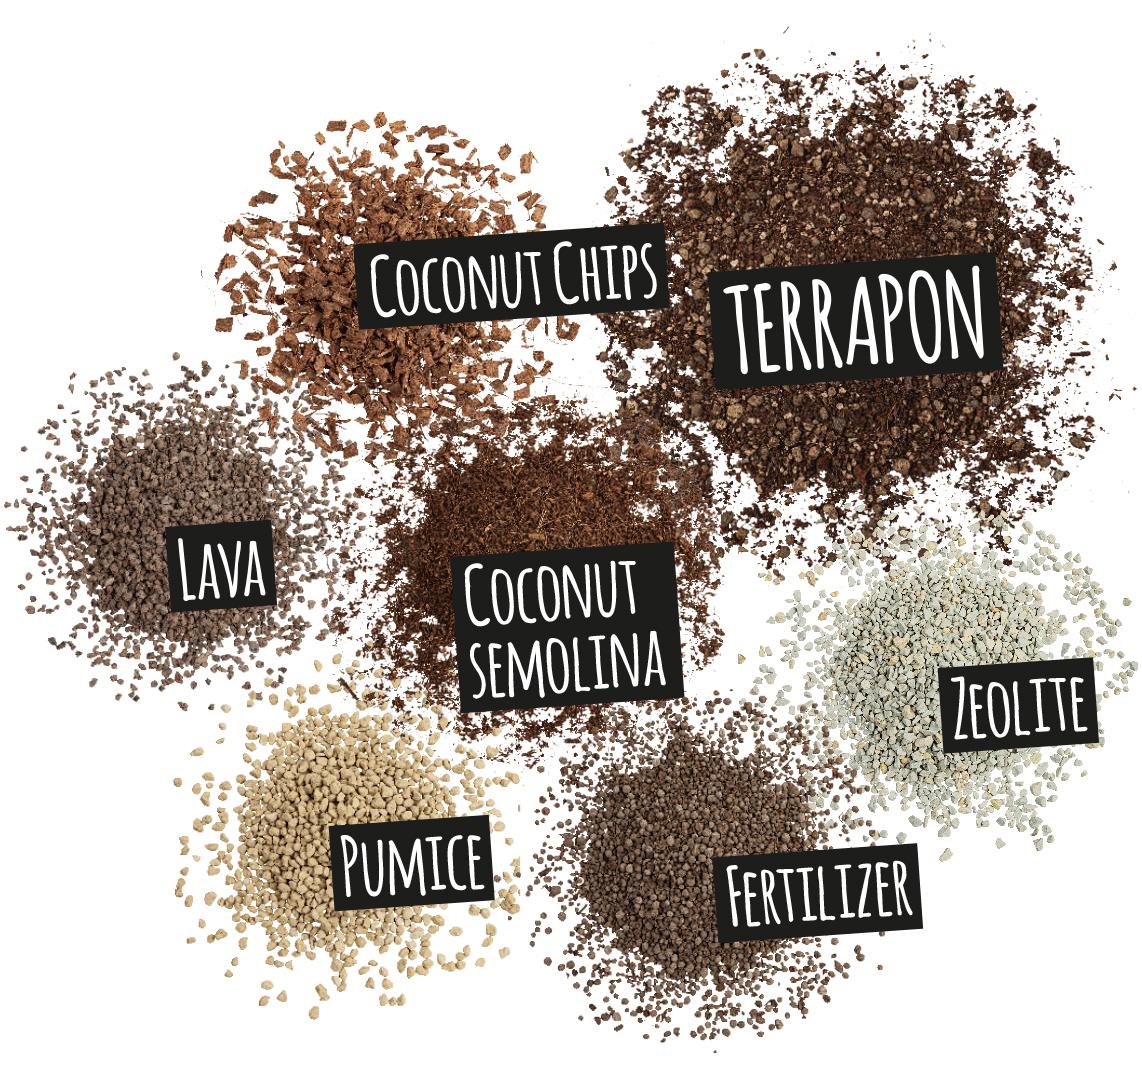 'Components of TERRAPON: coconut chips